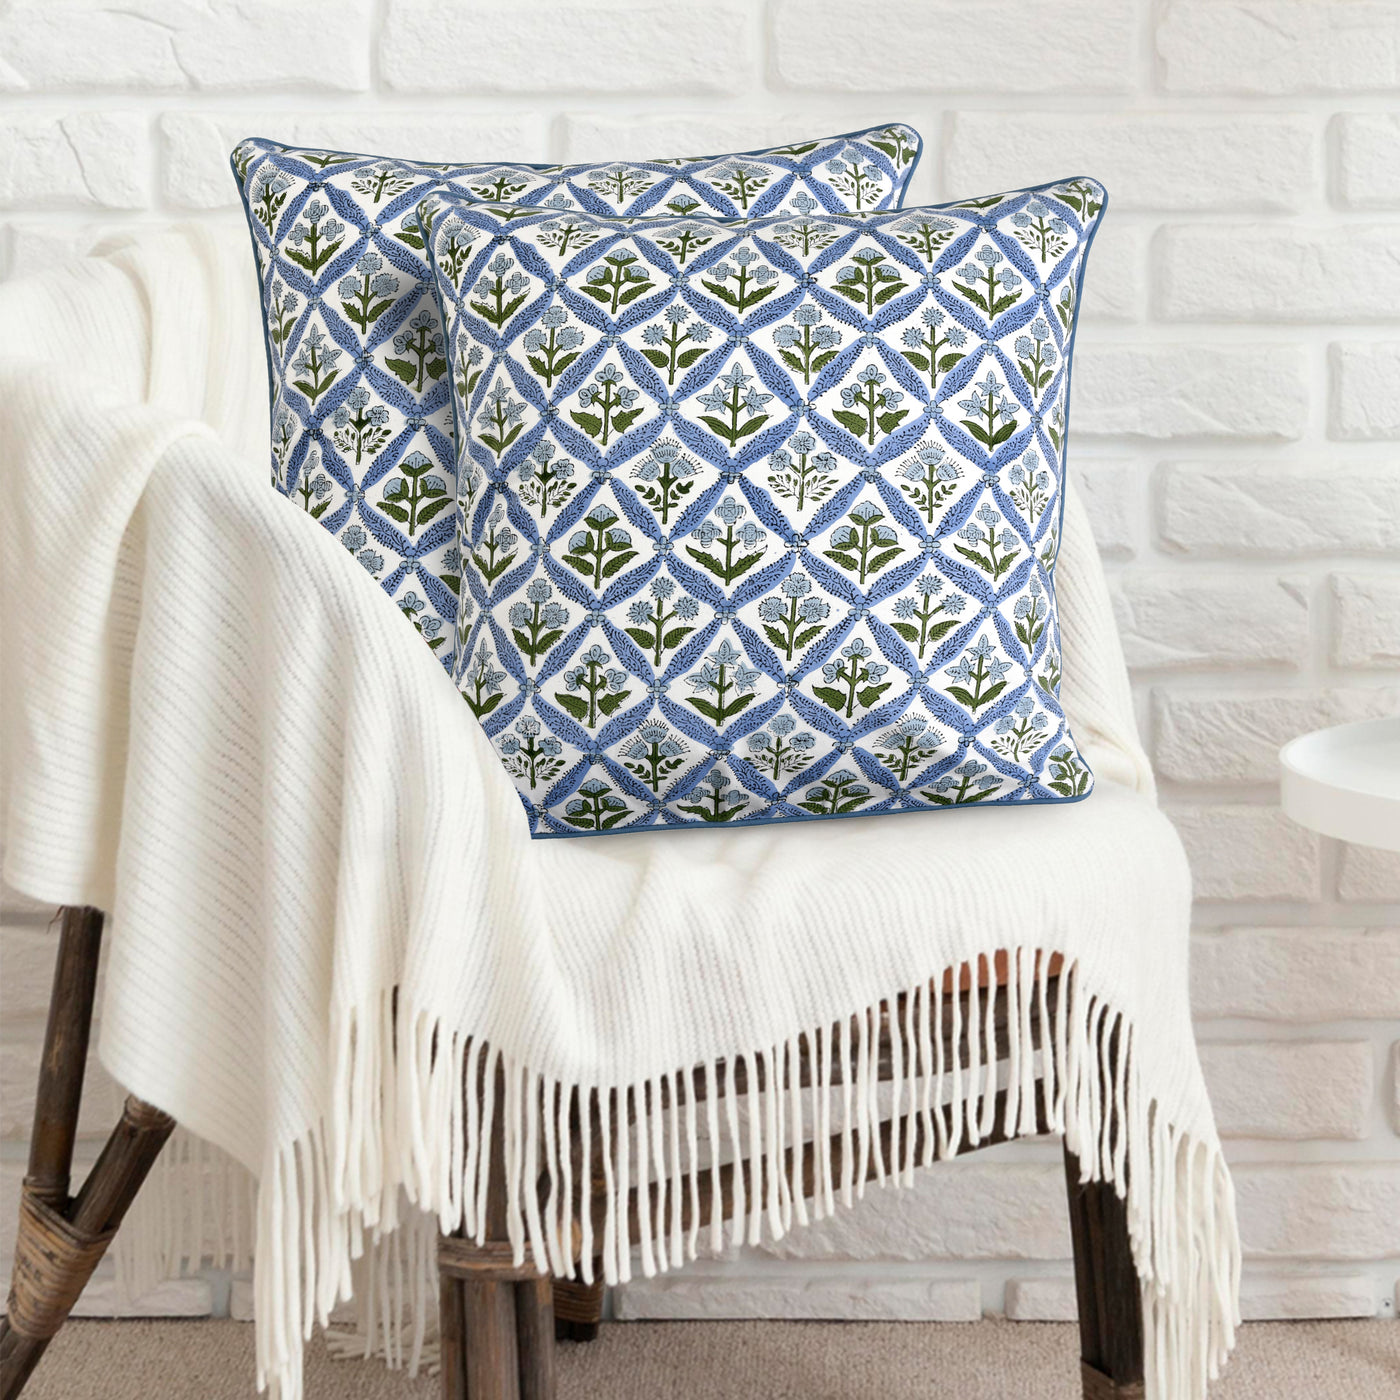 Ridhi Light Steel Blue Block Print Cotton Canvas Throw Pillow Covers for Decorative Couch Pillows for Living Room, Chic Boho Cute Outdoor Valentine Pillows Covers Gifts Inches